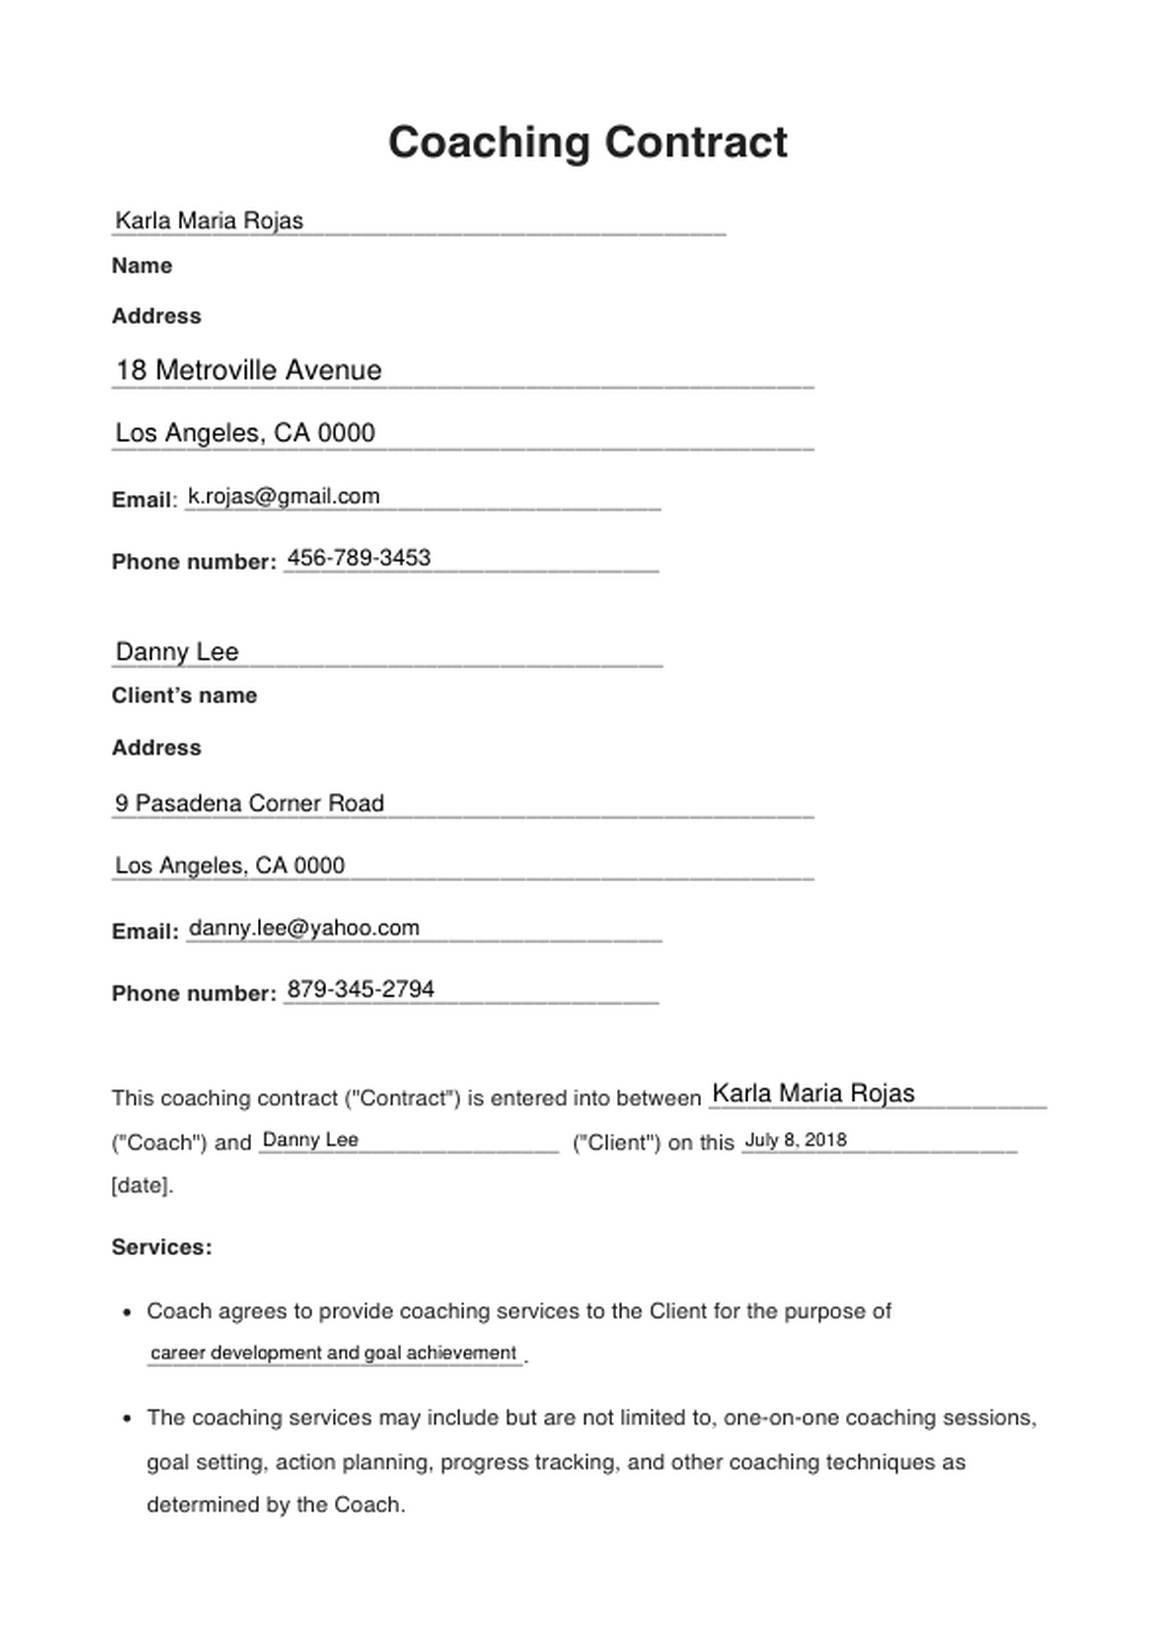 Coaching Contracts PDF Example